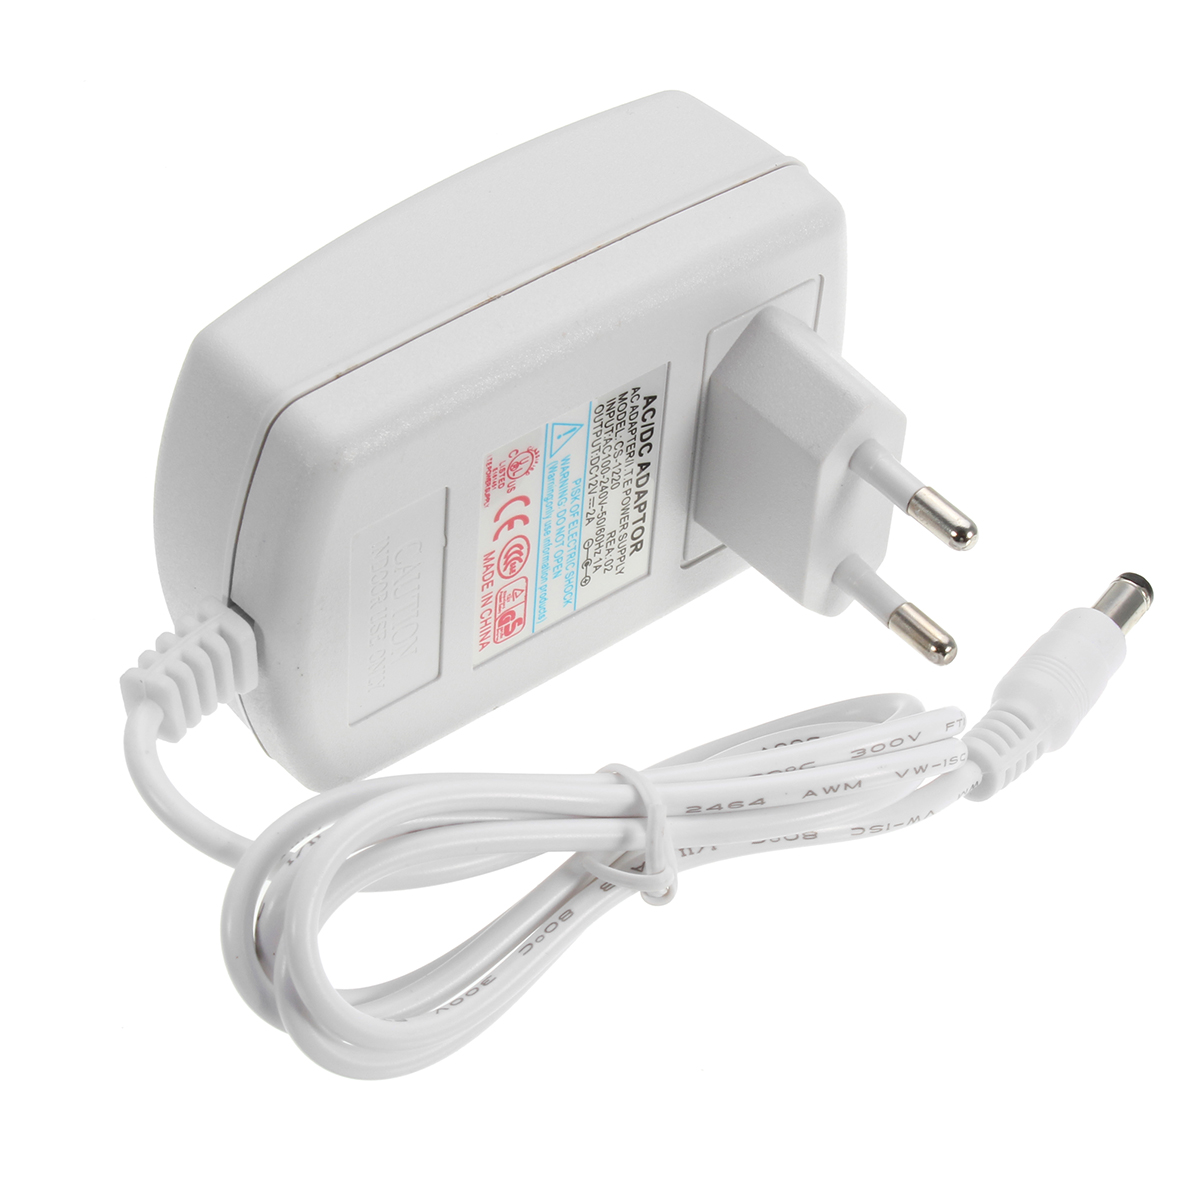 Power-Supply-Charger-Adapter-EU-Plug-for-Hollywood-Style-LED-Vanity-Mirror-Light-Bulbs-1309323-4